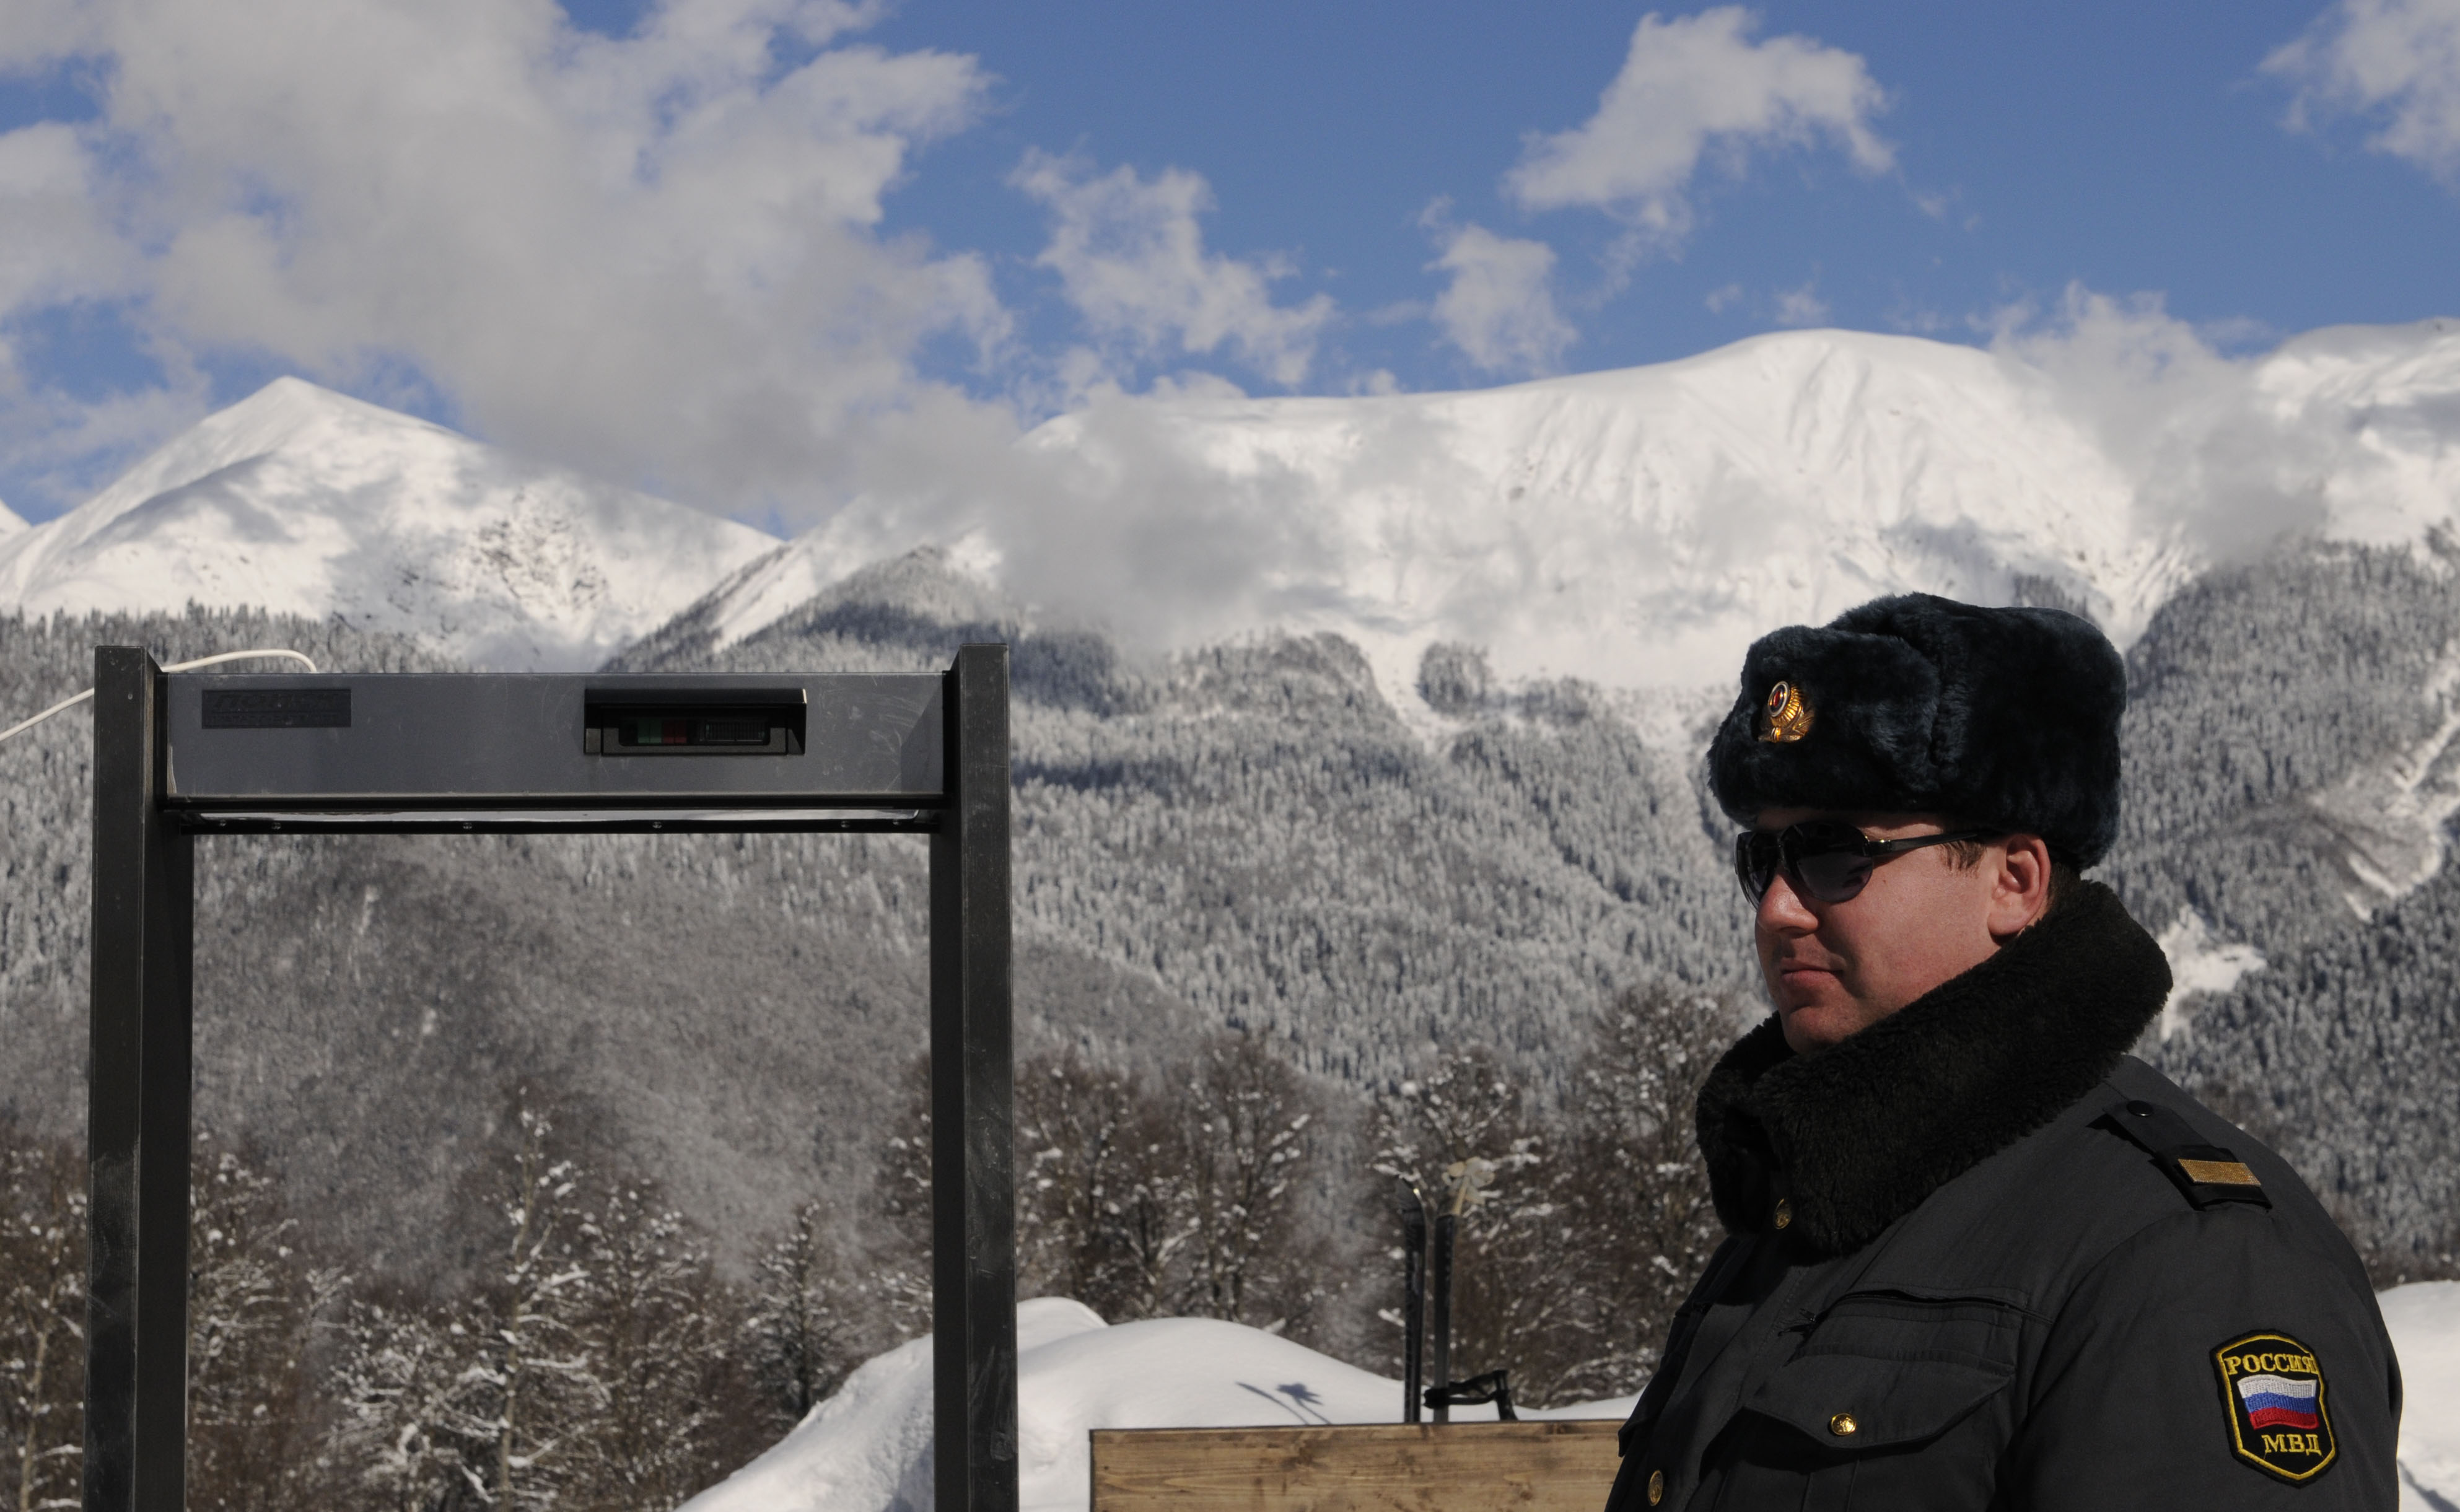 A police officer stands near a metal detector at the Mountain Carousel sports and holiday complex, near the Winter Olympics city of Sochi (Mikhail Mordasov / AFP / Getty Images)